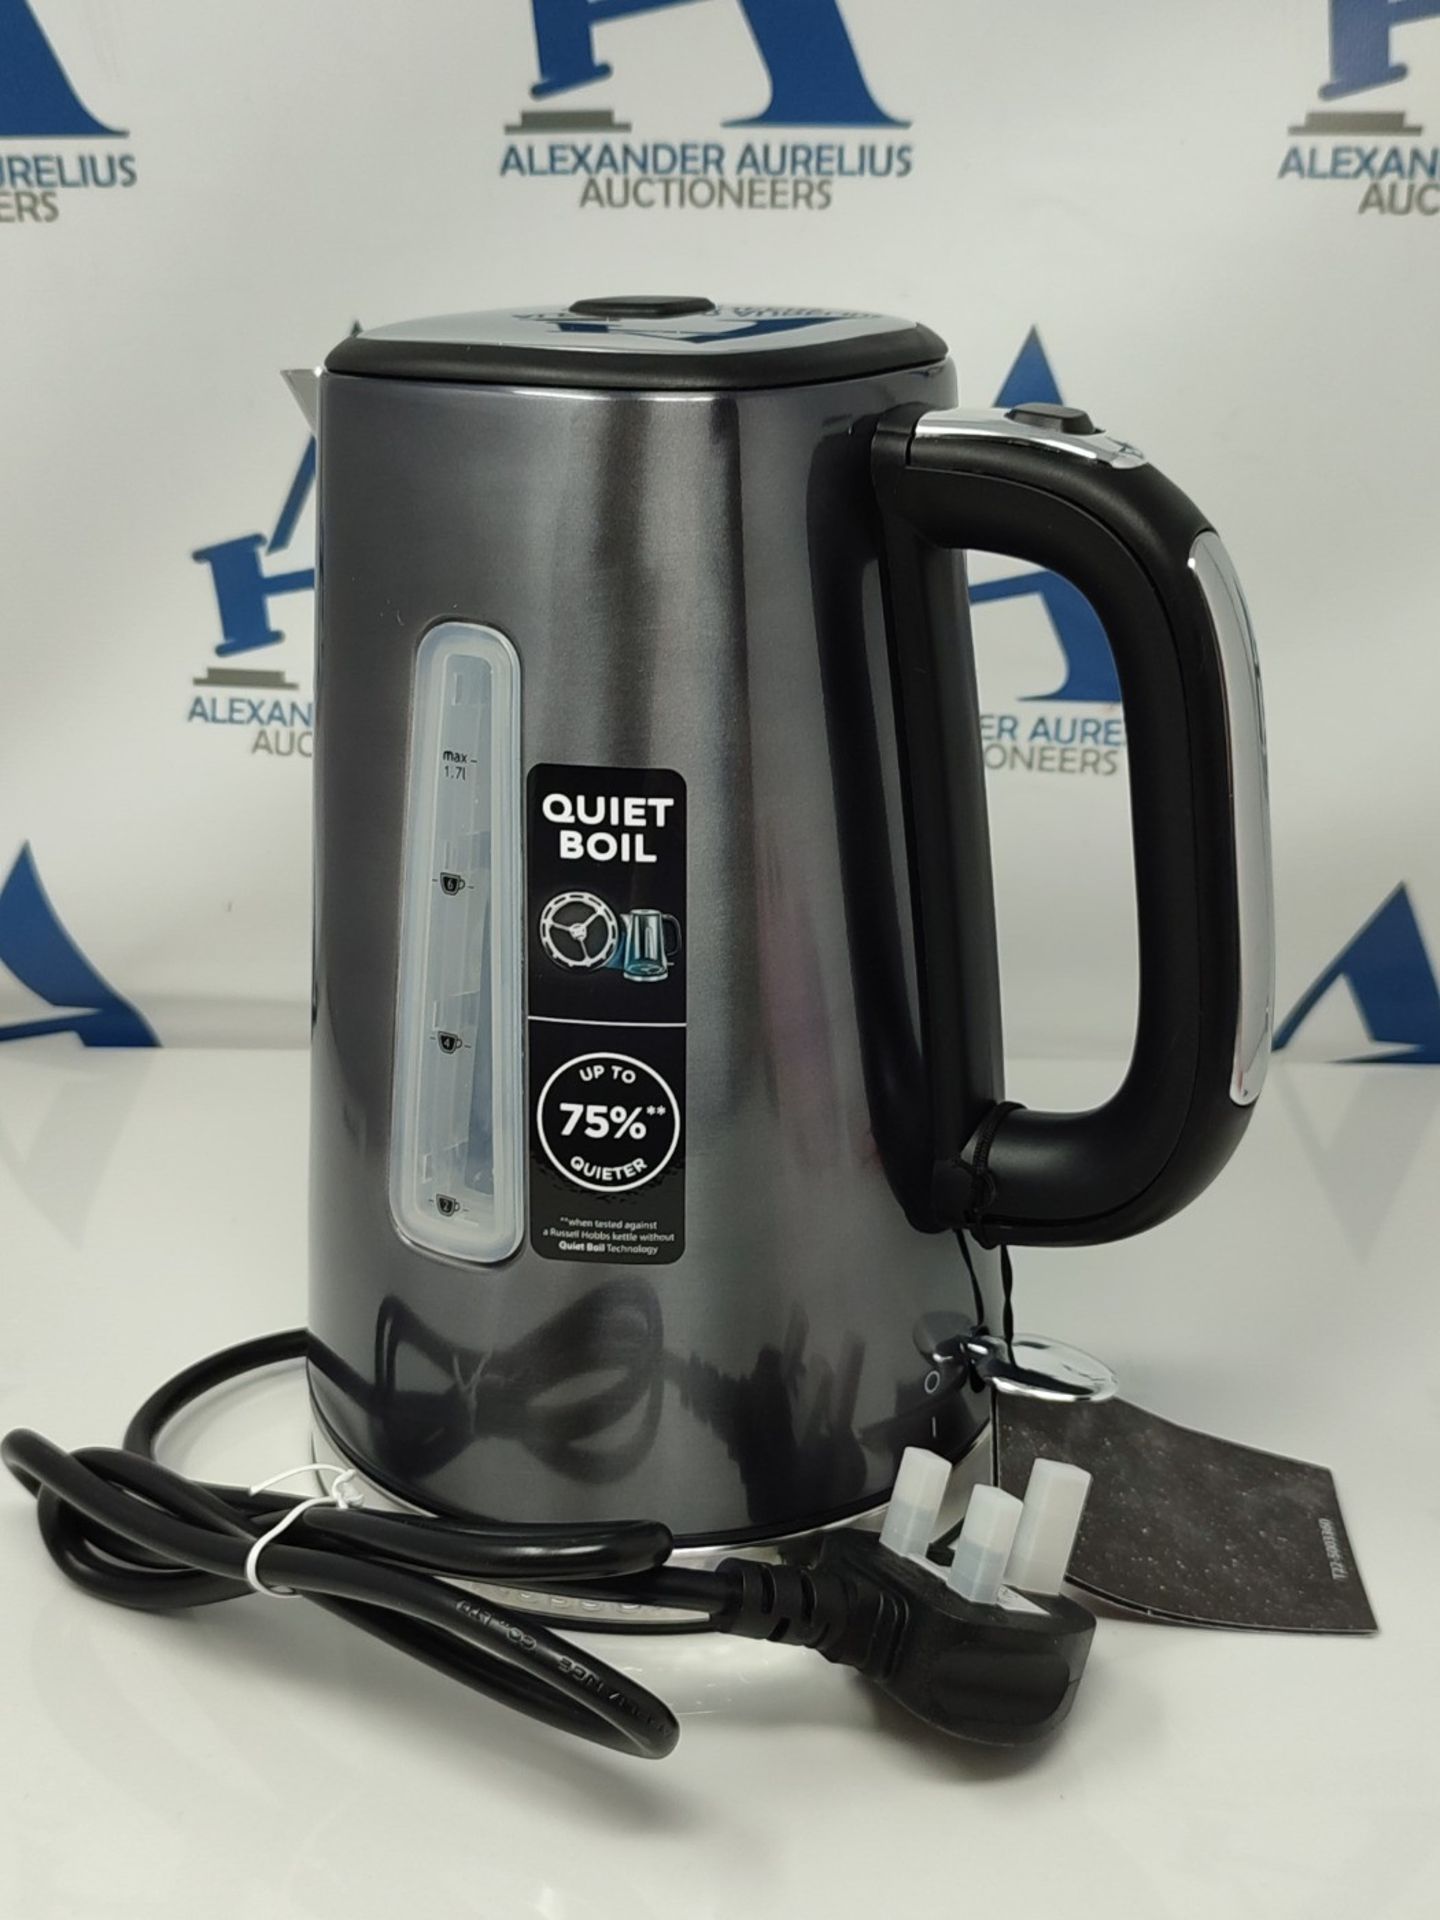 Russell Hobbs 23211 Luna Quiet Boil Electric Kettle, Stainless Steel, 3000 W, 1.7 Litr - Image 3 of 3